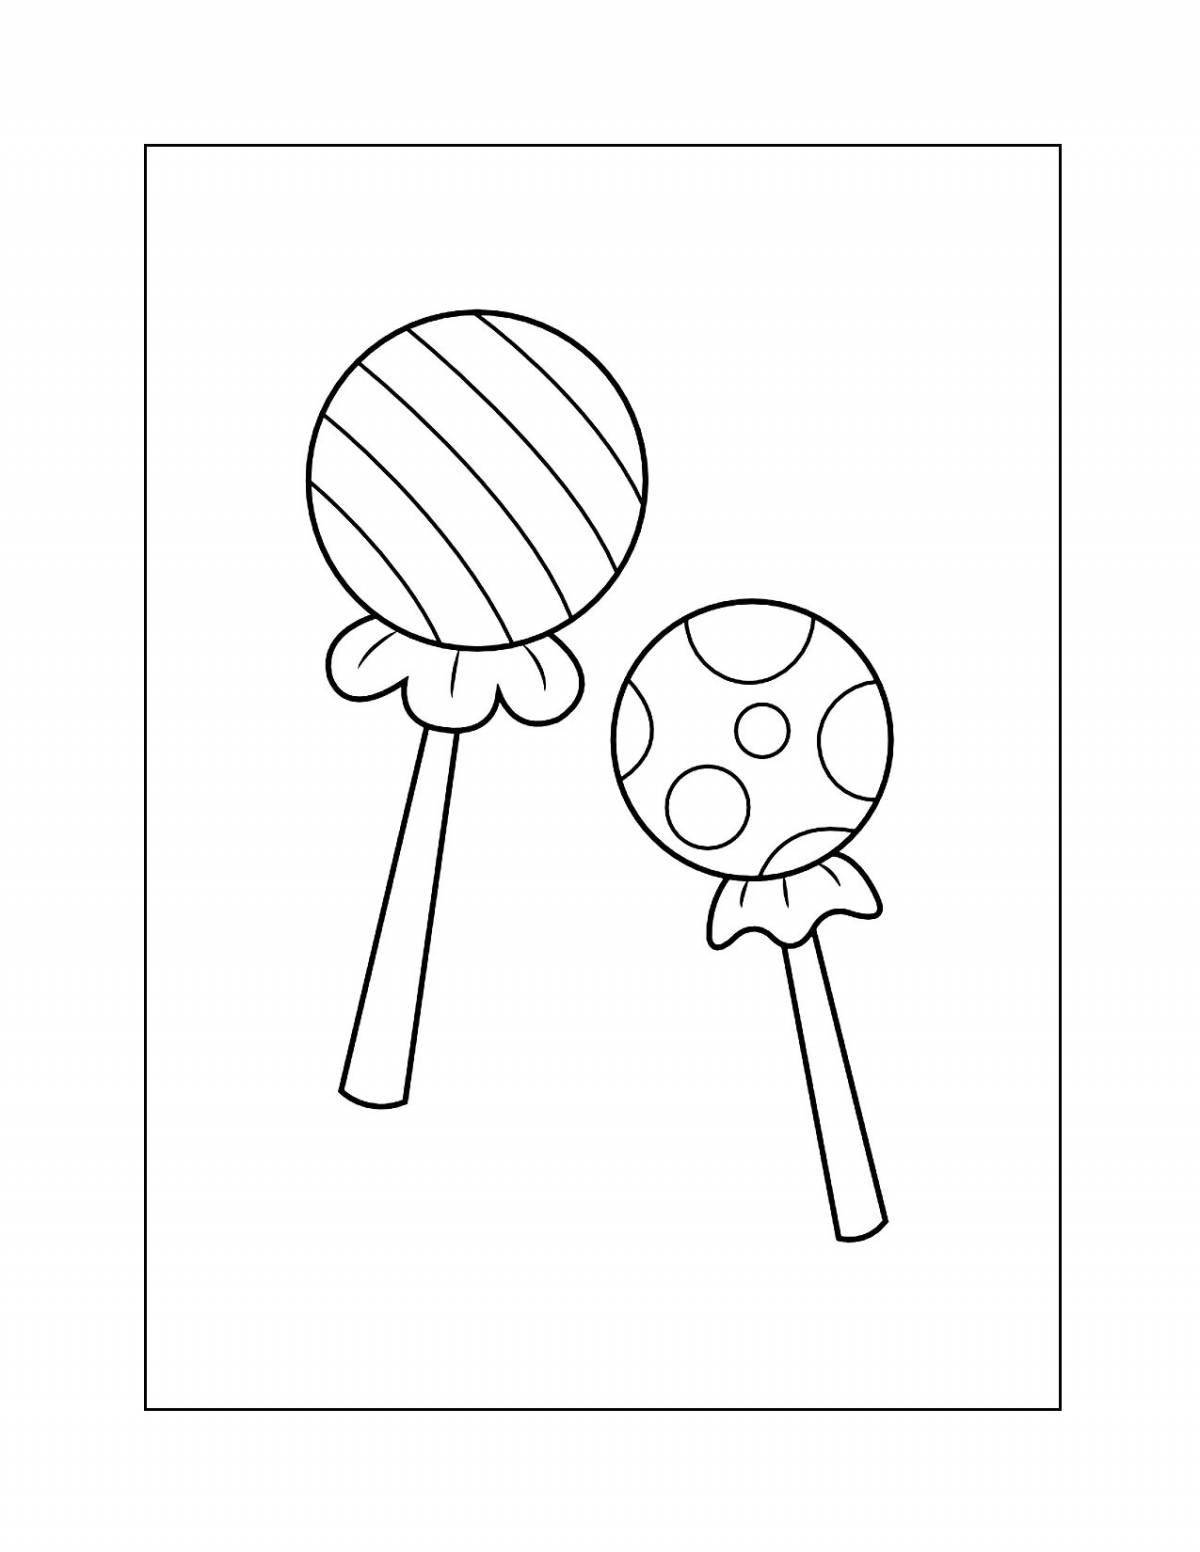 Adorable candy coloring book for kids